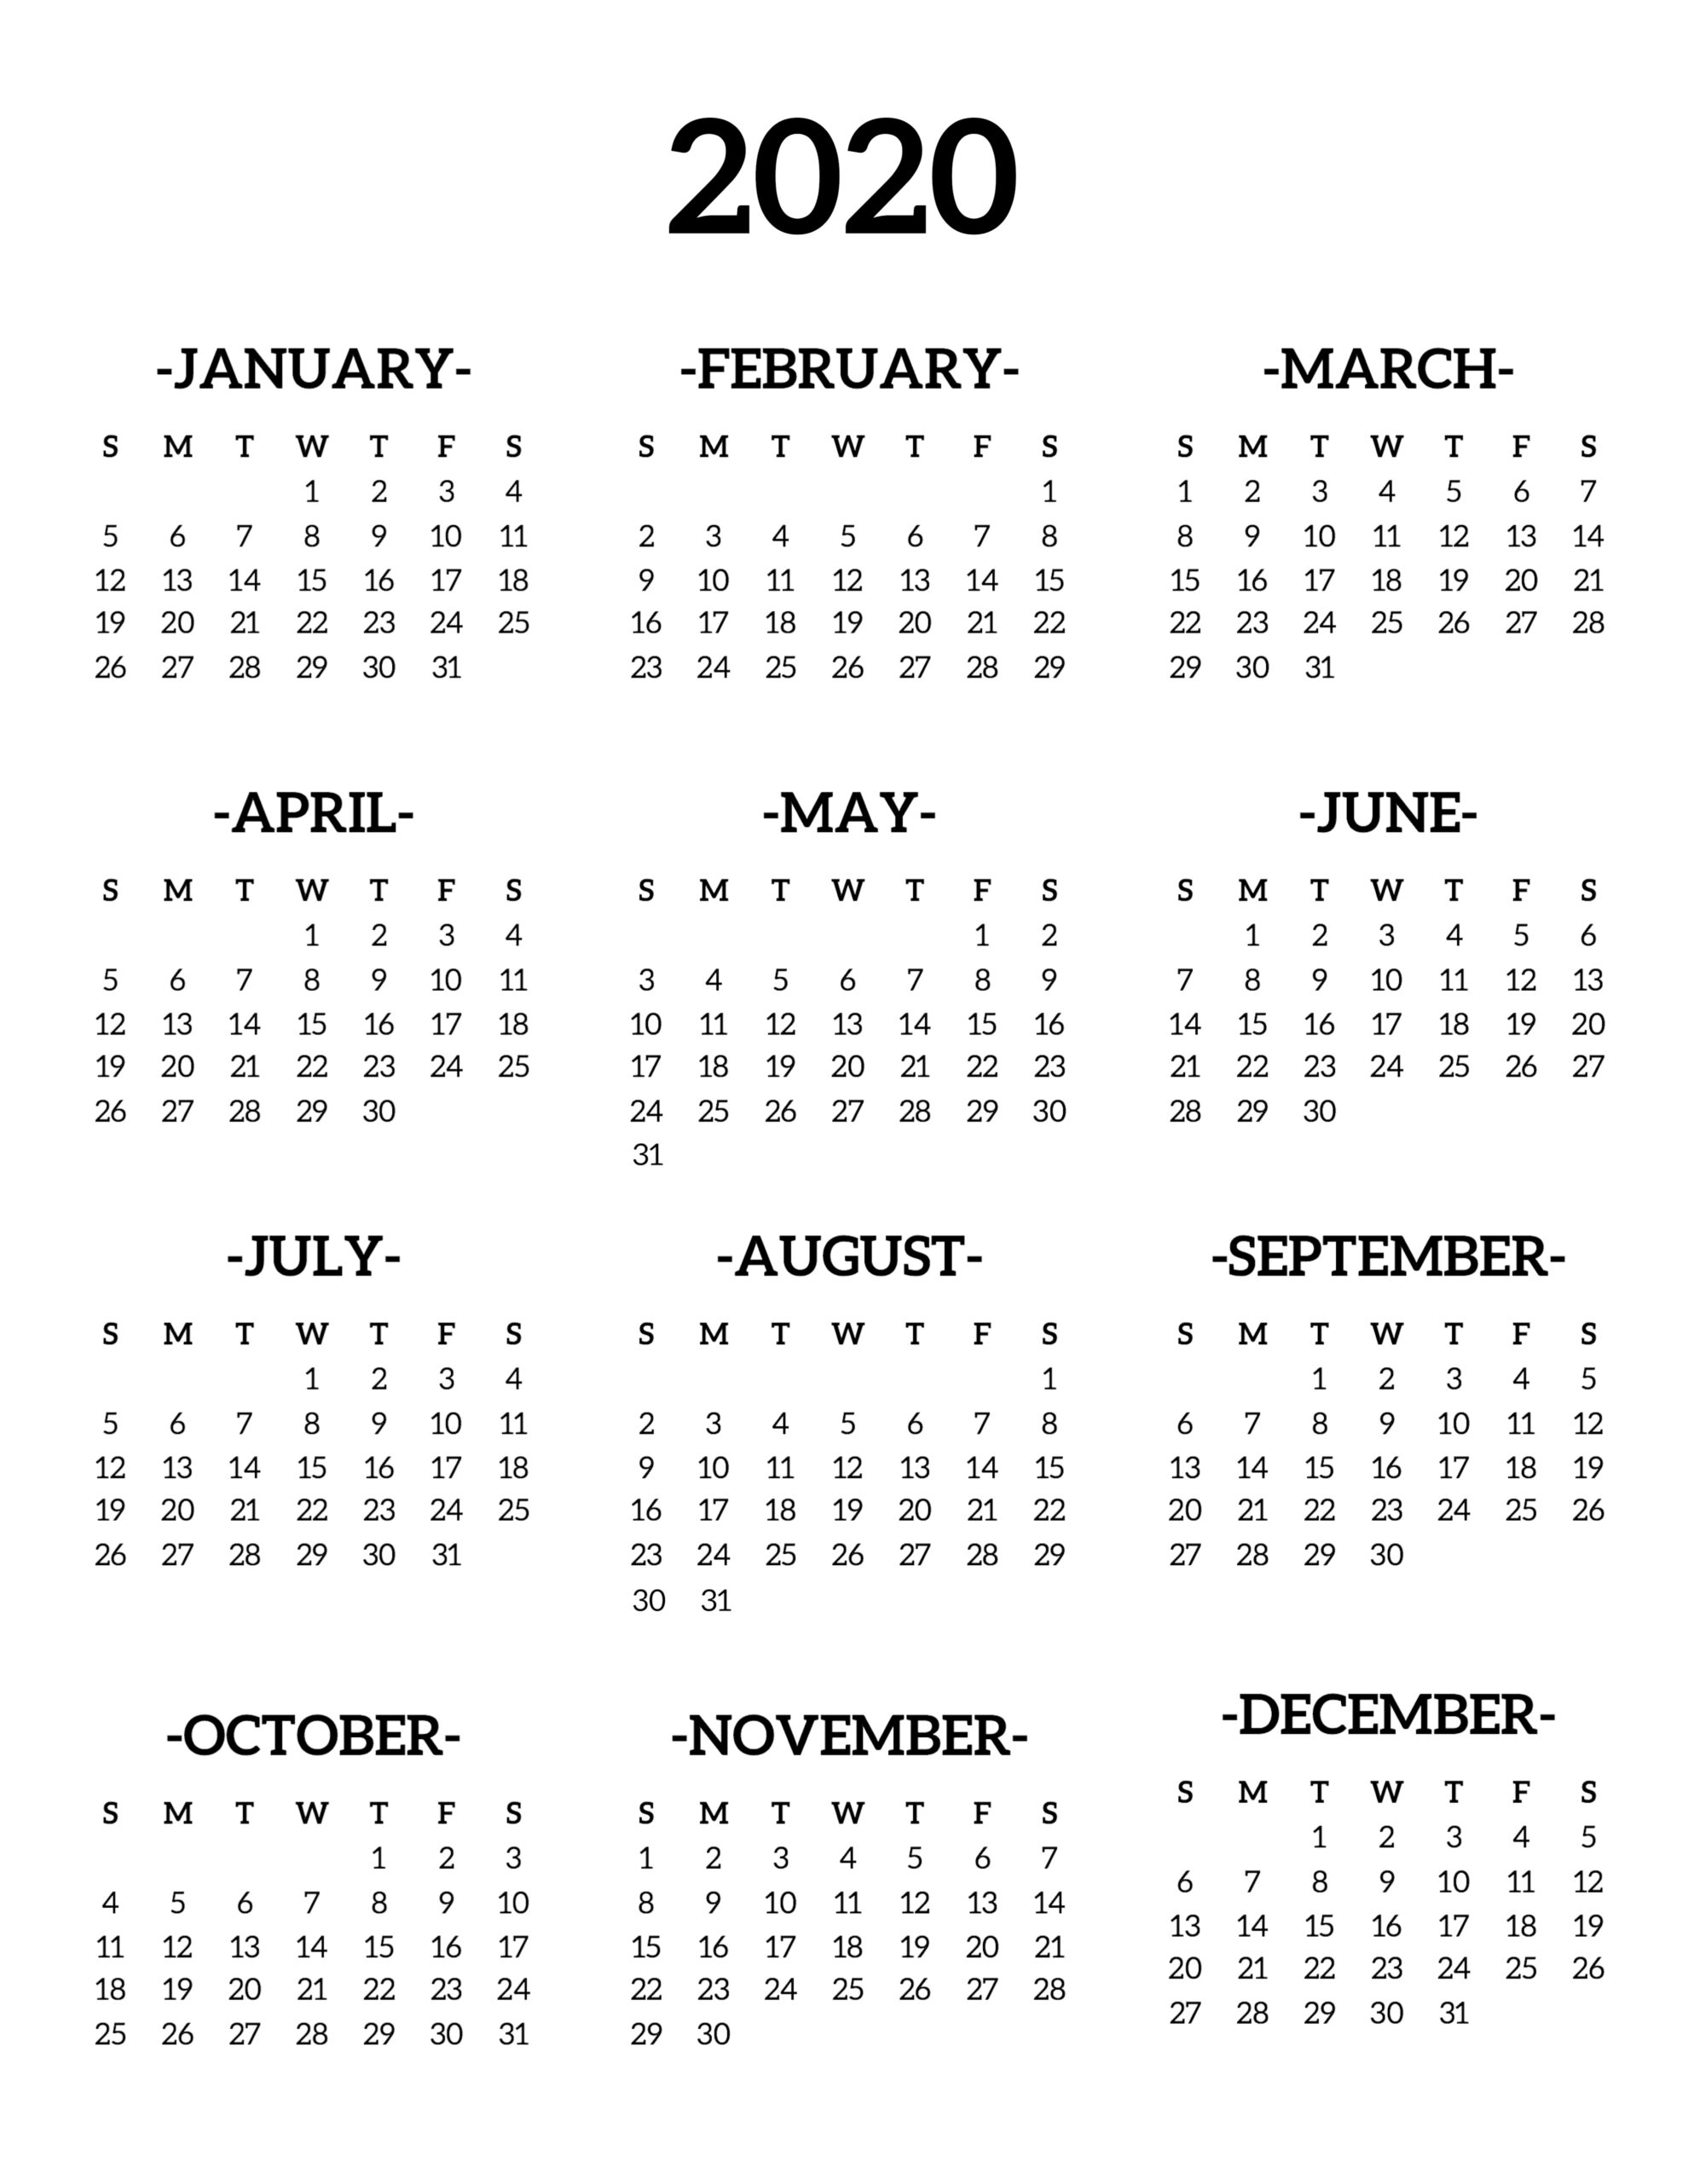 Calendar 2020 Printable One Page - Paper Trail Design